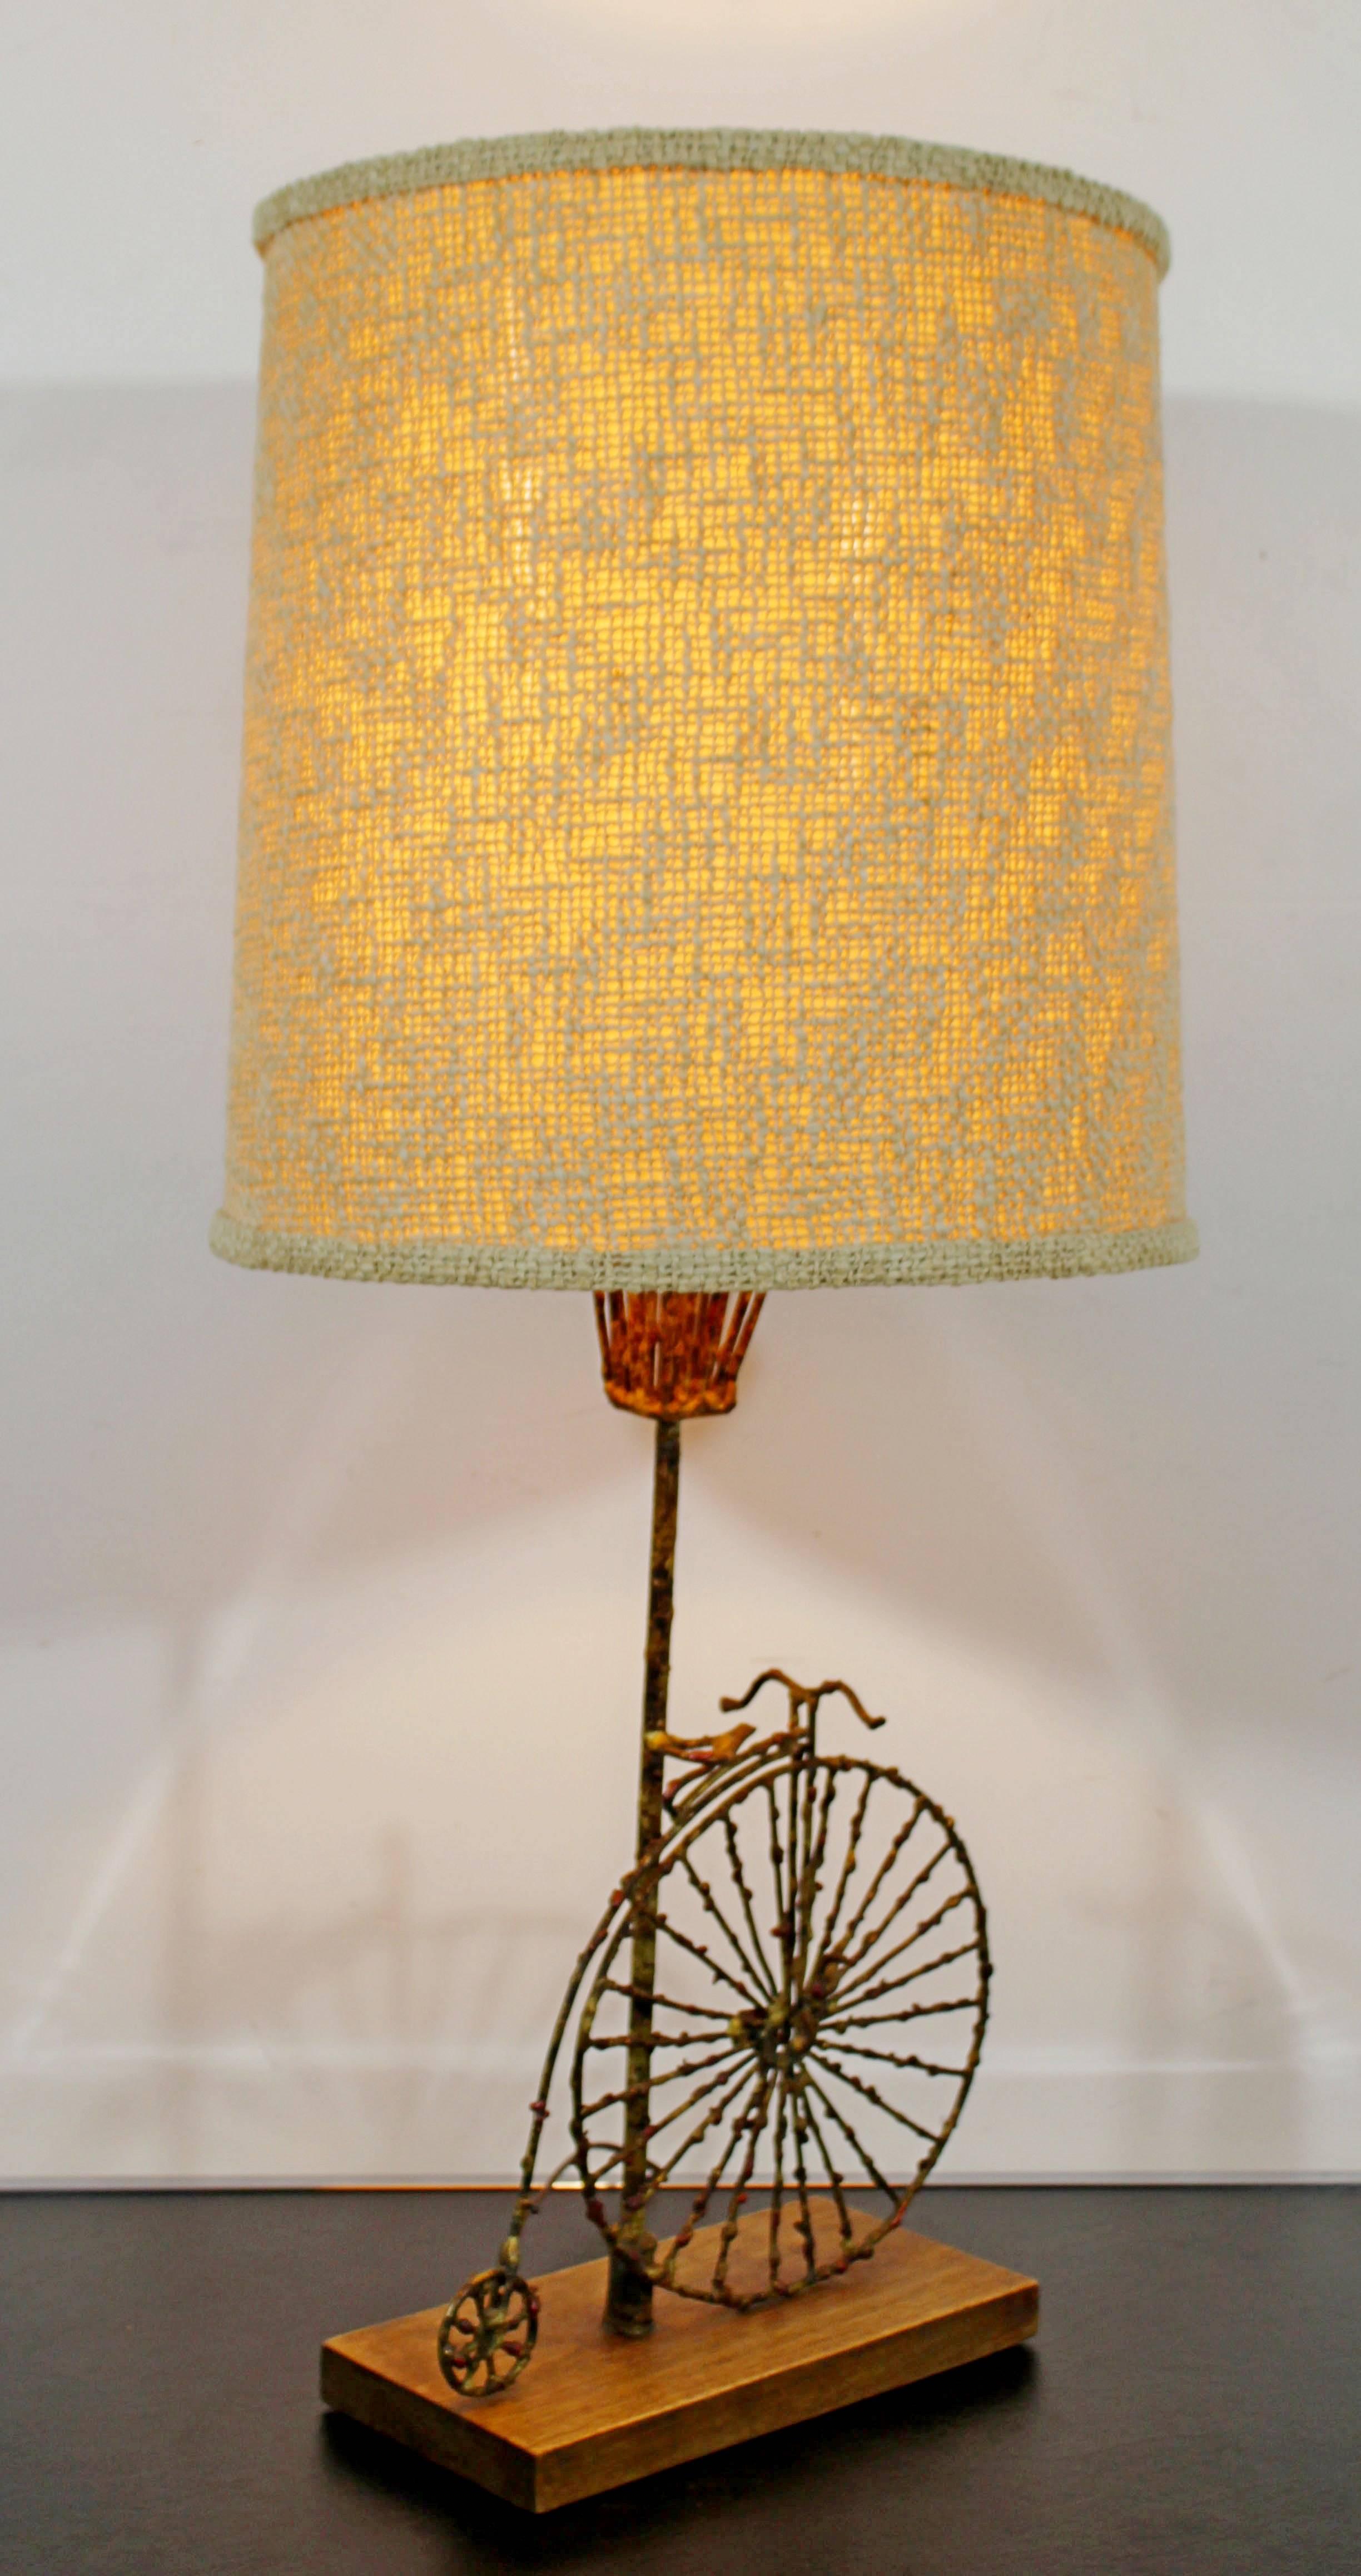 For your consideration is a beautiful and whimsical, Brutalist, brass bicycle, table lamp, signed Fantoni, circa the 1960s, made in Italy. In excellent condition. The dimensions are 11.5